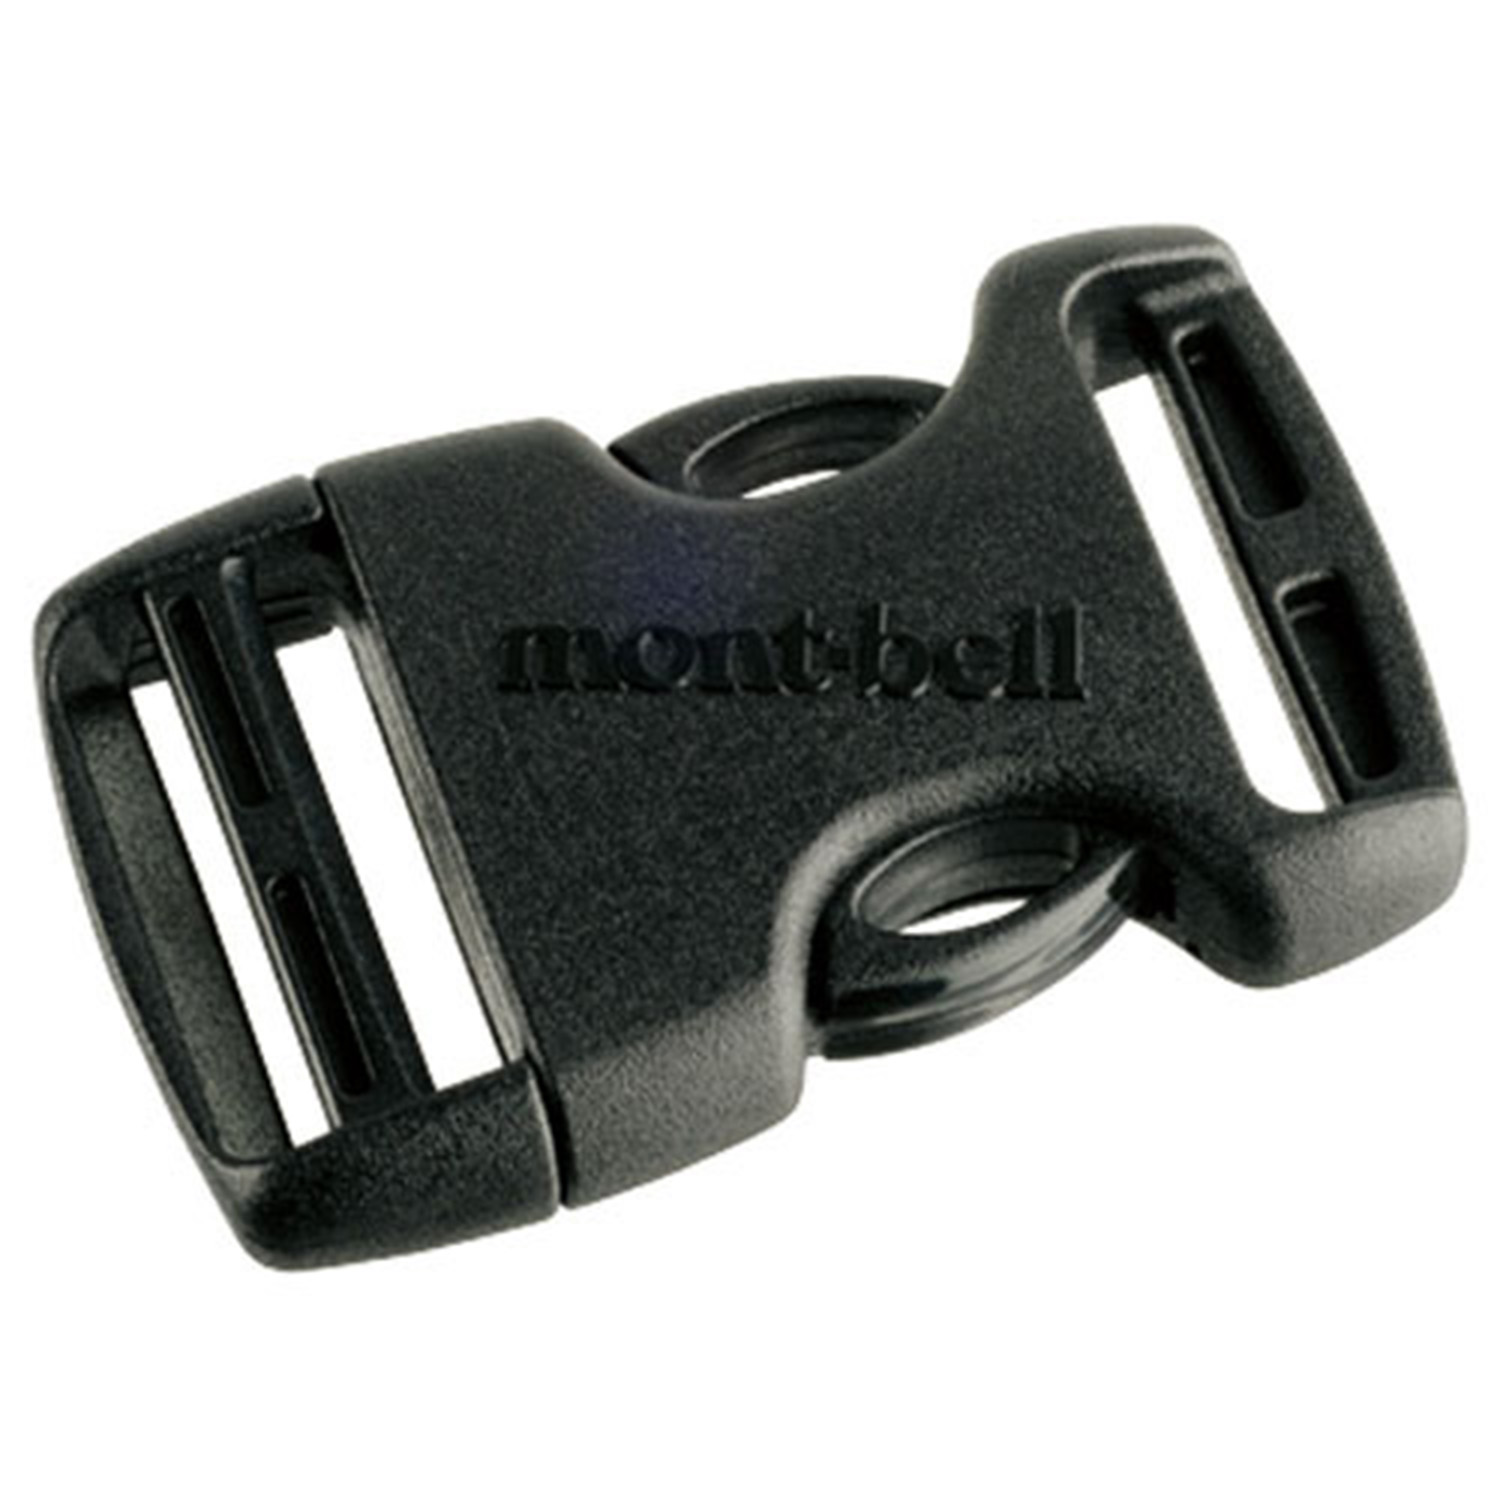 Standard Side Release Buckle - Ripstop by the Roll